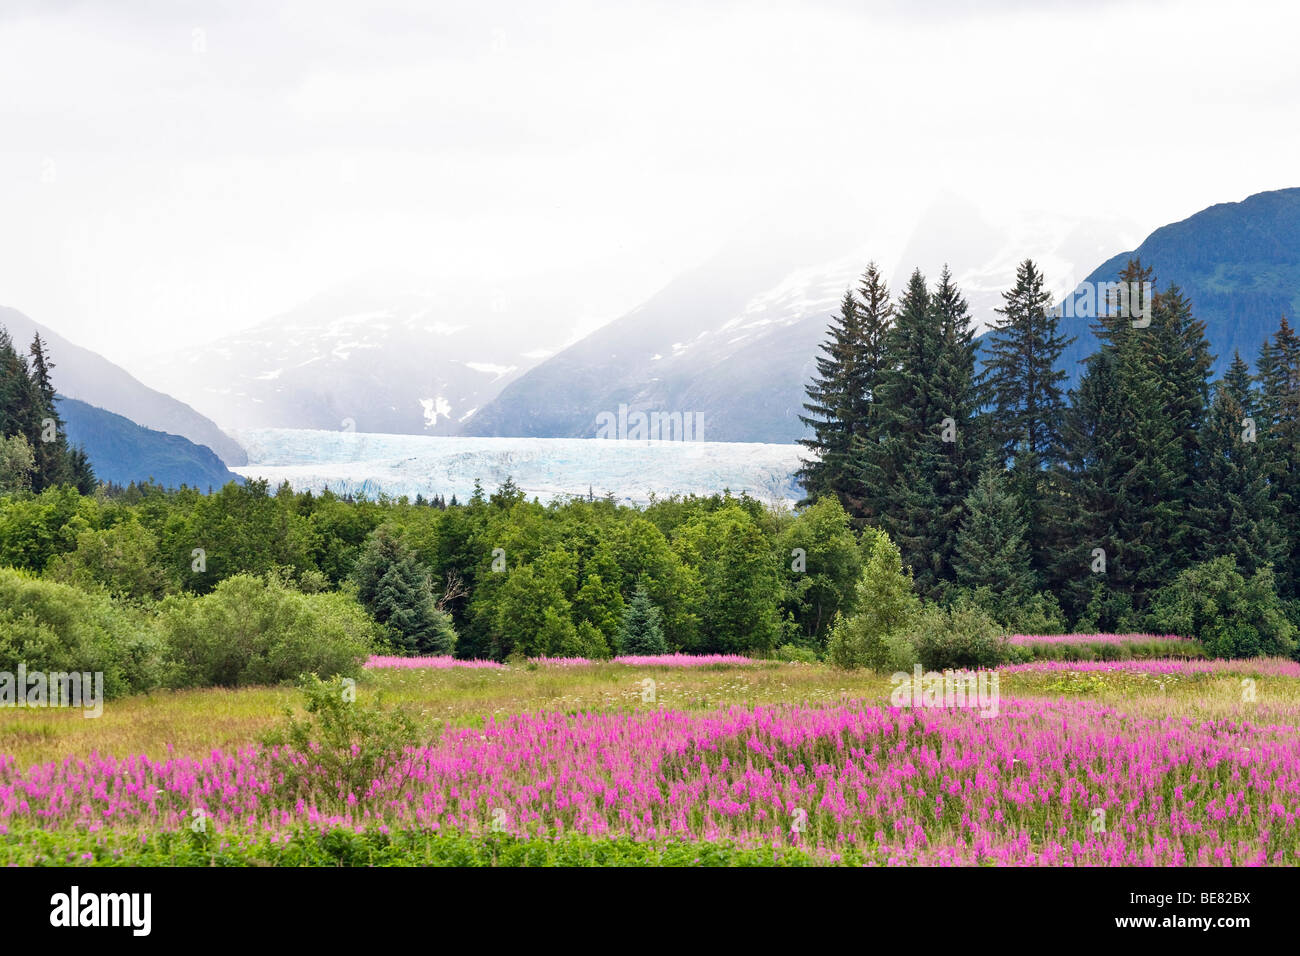 Blooming flowers in front of Mendenhall glacier under clouds, Southeast Alaska, USA Stock Photo